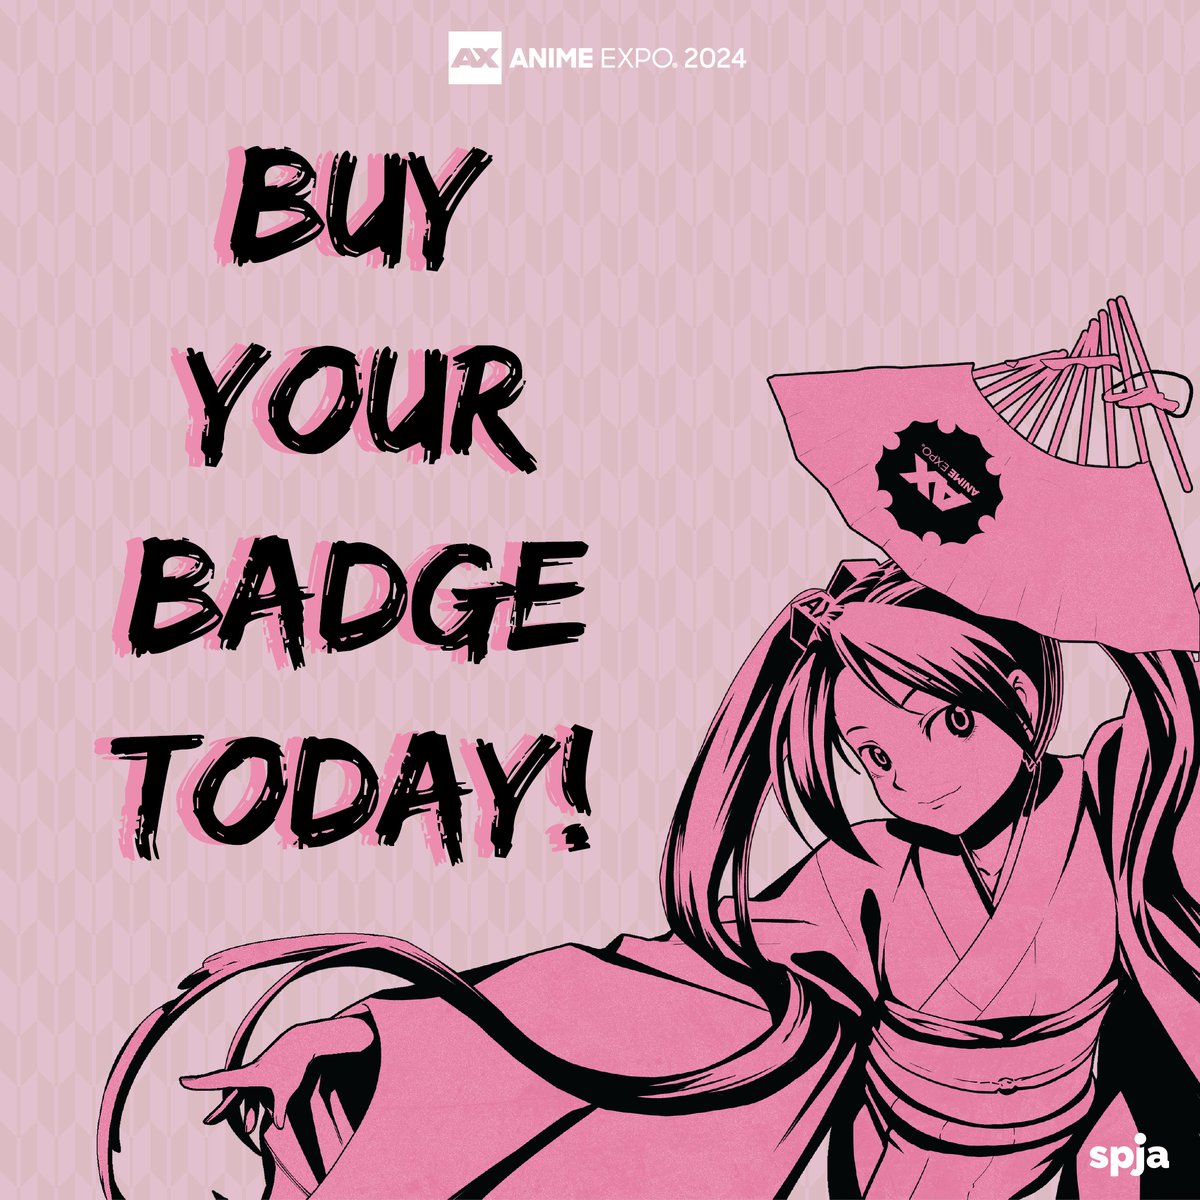 ⏰ Time's ticking! Buy your #AX2024 badge now before prices go up! 🌸 This is your sign to secure your spot at the best rate 🚀💸 🎟️ Buy Your Badge Now! bit.ly/4bcTcYQ 📱 Download Our Mobile App! anime-expo.org/mobile-app/